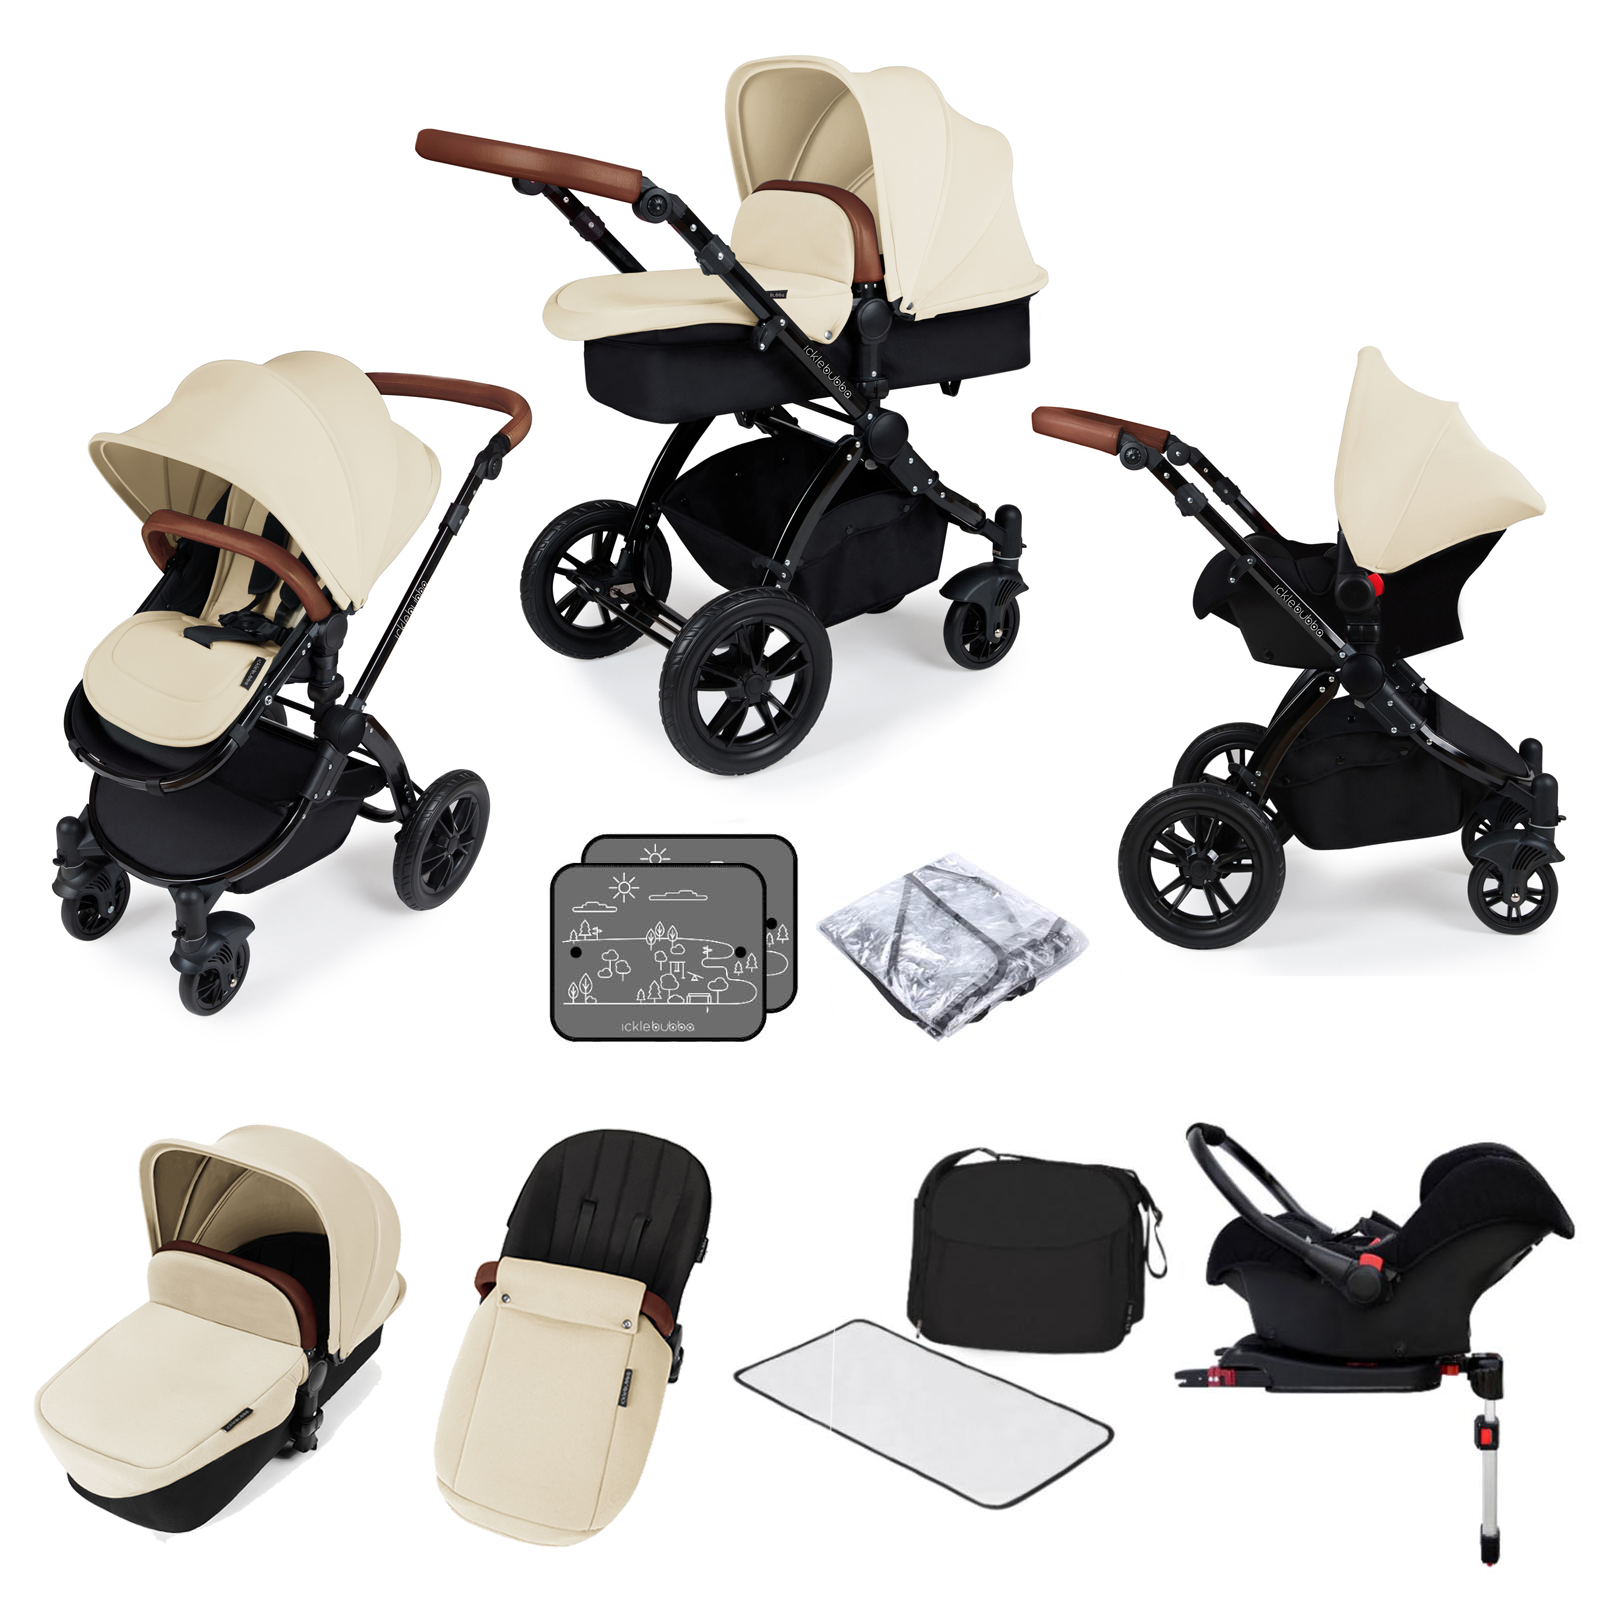 Ickle bubba Stomp V3 Black All In One (Galaxy) 11pc Travel System & Isofix Base Bundle- Sand